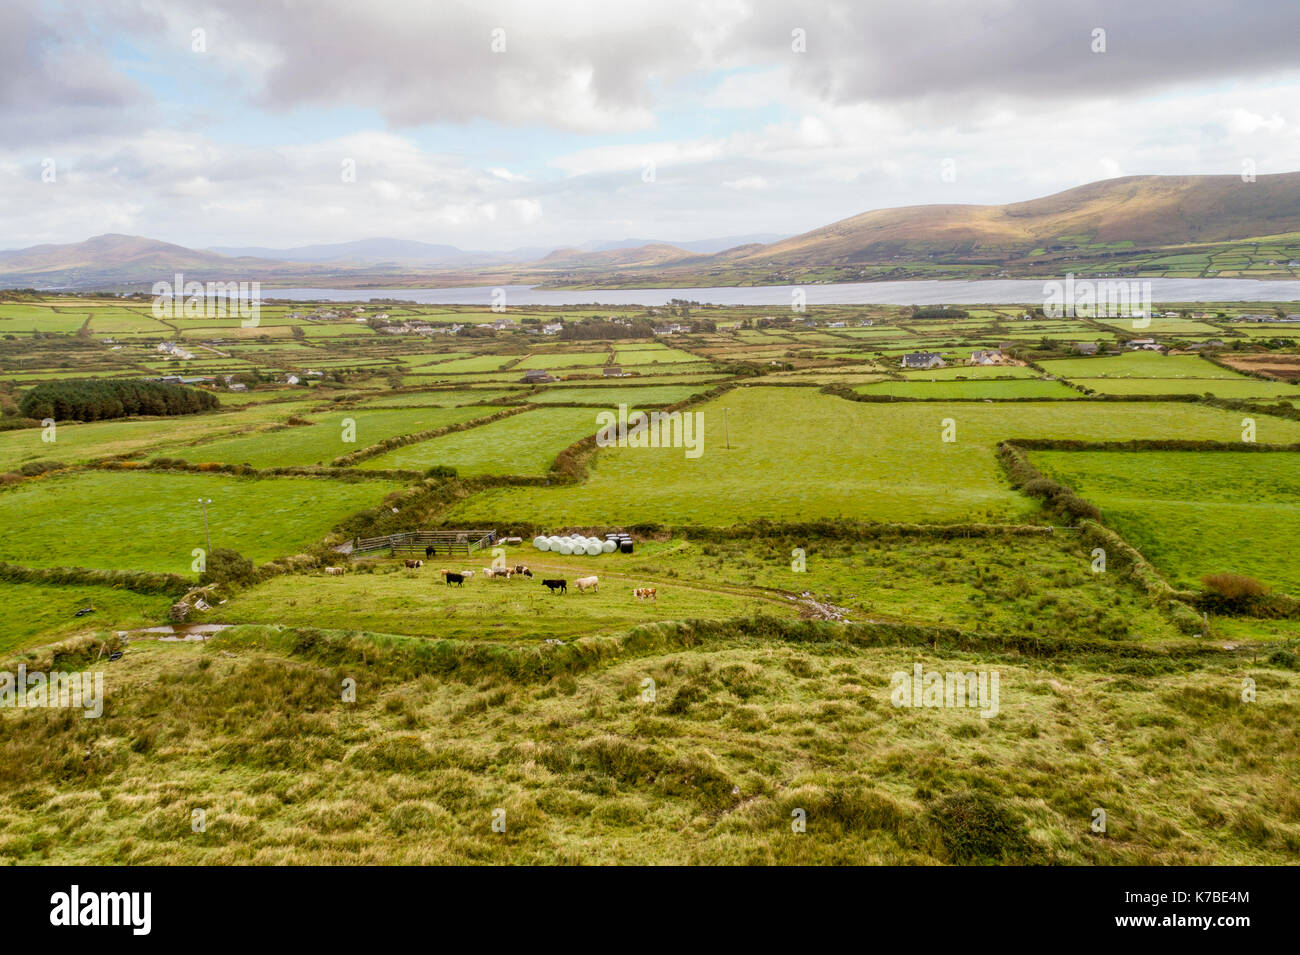 Farmland and fields separated by Hedgerows, Valentia Island, County Kerry, Ireland Stock Photo